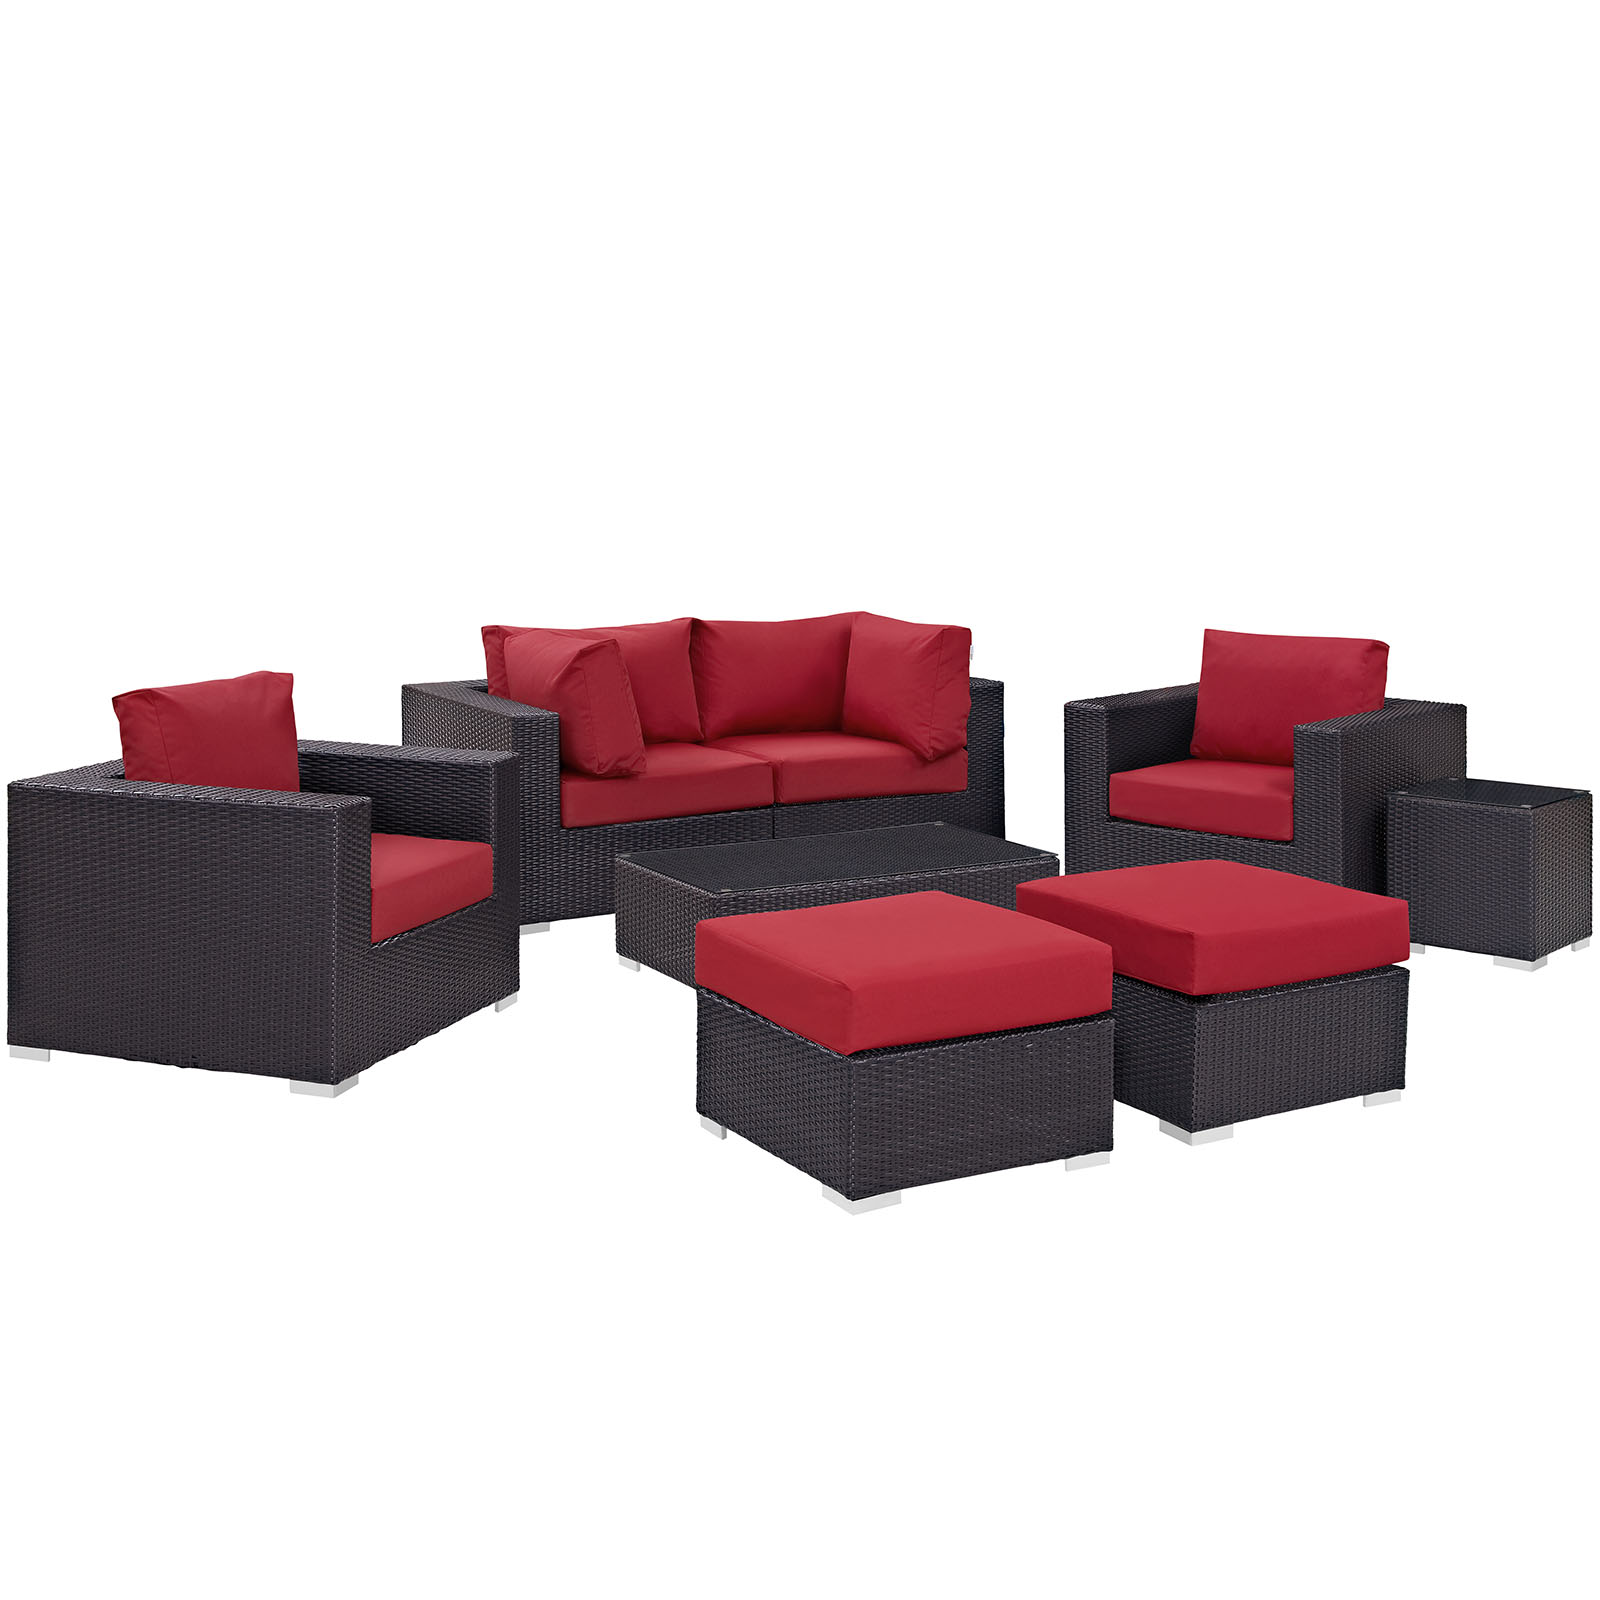 Modway Convene 8 Piece Outdoor Patio Sectional Set in Espresso Red - image 3 of 11